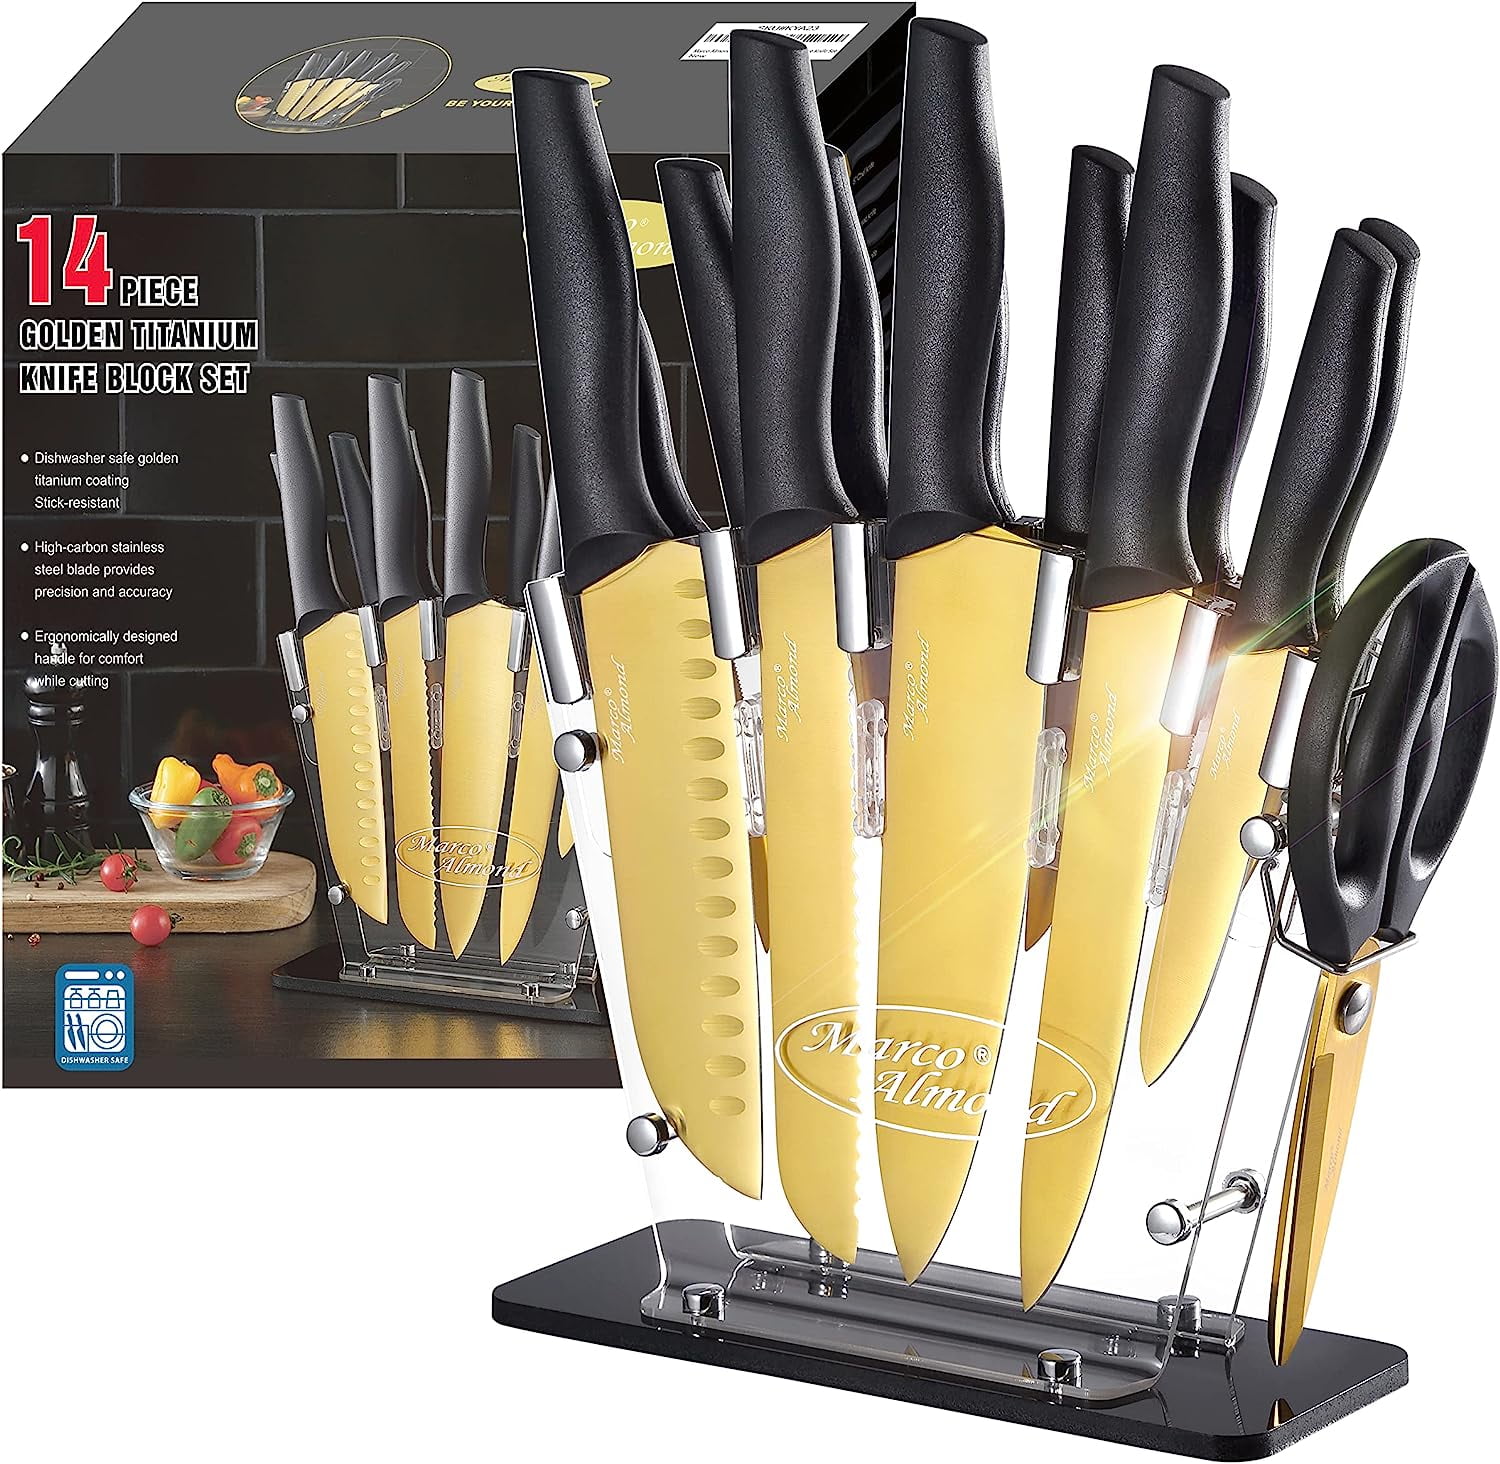 Marco Almond Dishwasher Safe MA23 Black Kitchen Knife Set, 17 Pieces Stainless Steel Knives Sets for Kithcen with Block and Sharpener